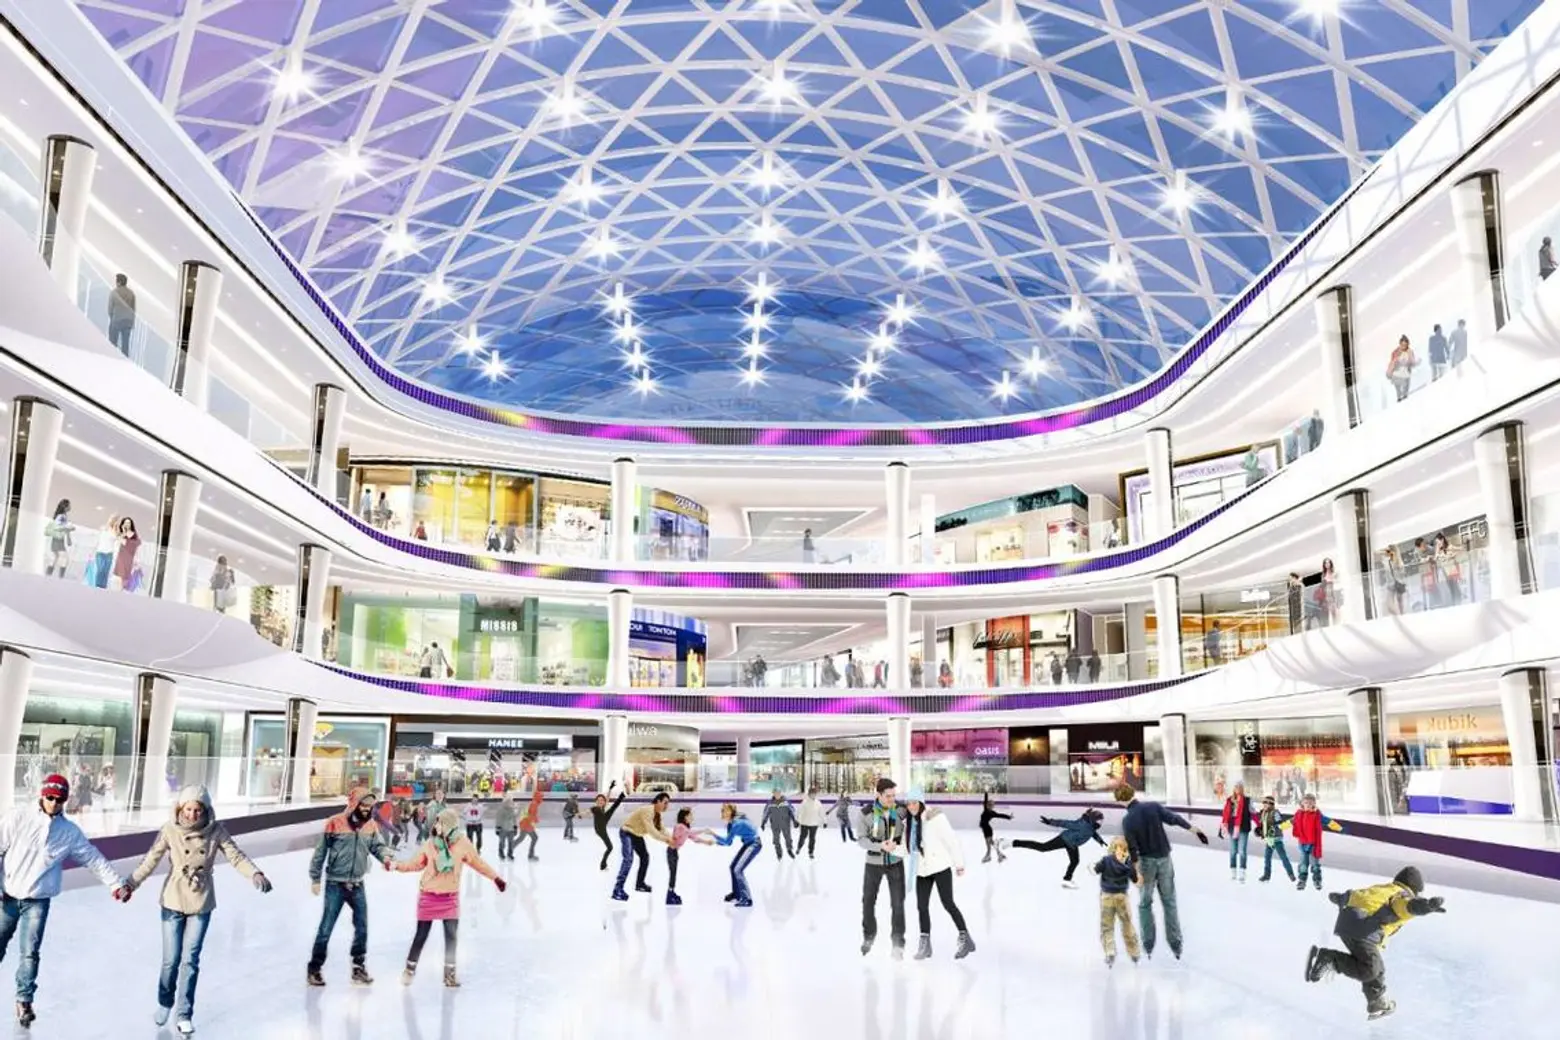 New Jersey’s long-stalled American Dream mega-mall is delayed again